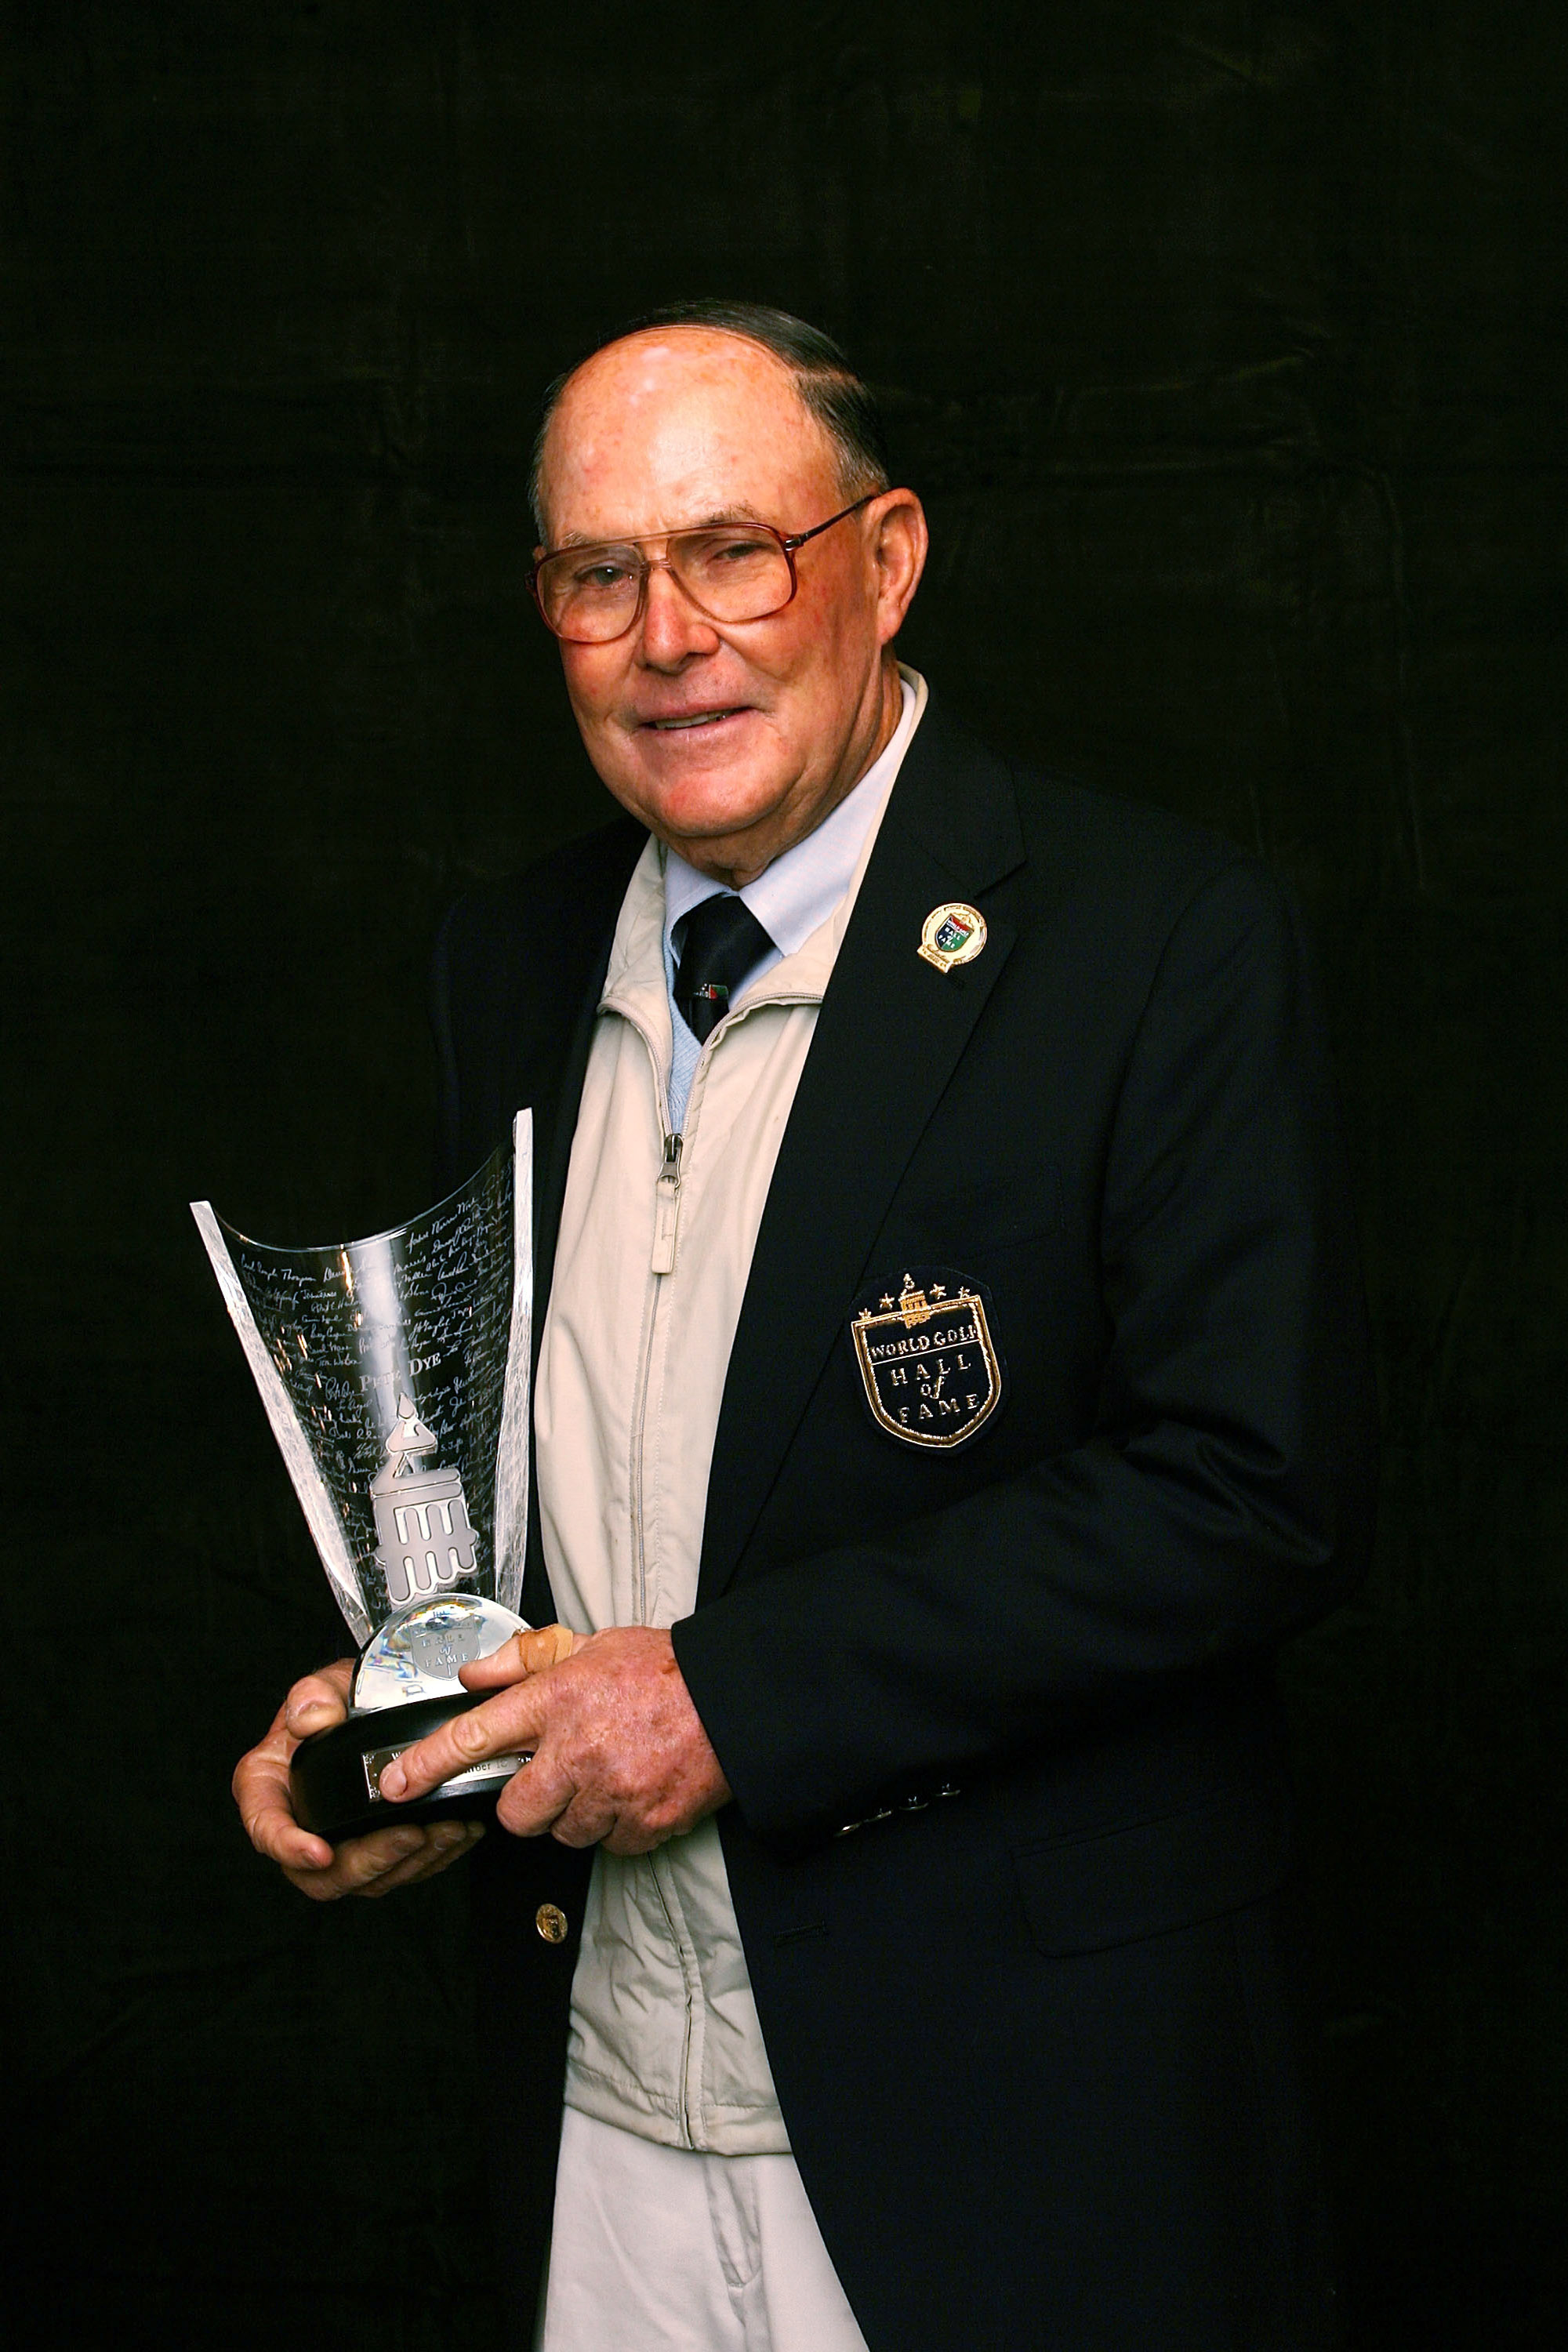 ST. AUGUSTINE, FL - NOVEMBER 10:  Pete Dye, a legendary golf course designer, holds his Hall of Fame trophy at the World Golf Hall of Fame on November 10, 2008 during induction ceremonies in St. Augustine, Florida.  (Photo by Marc Serota/Getty Images)